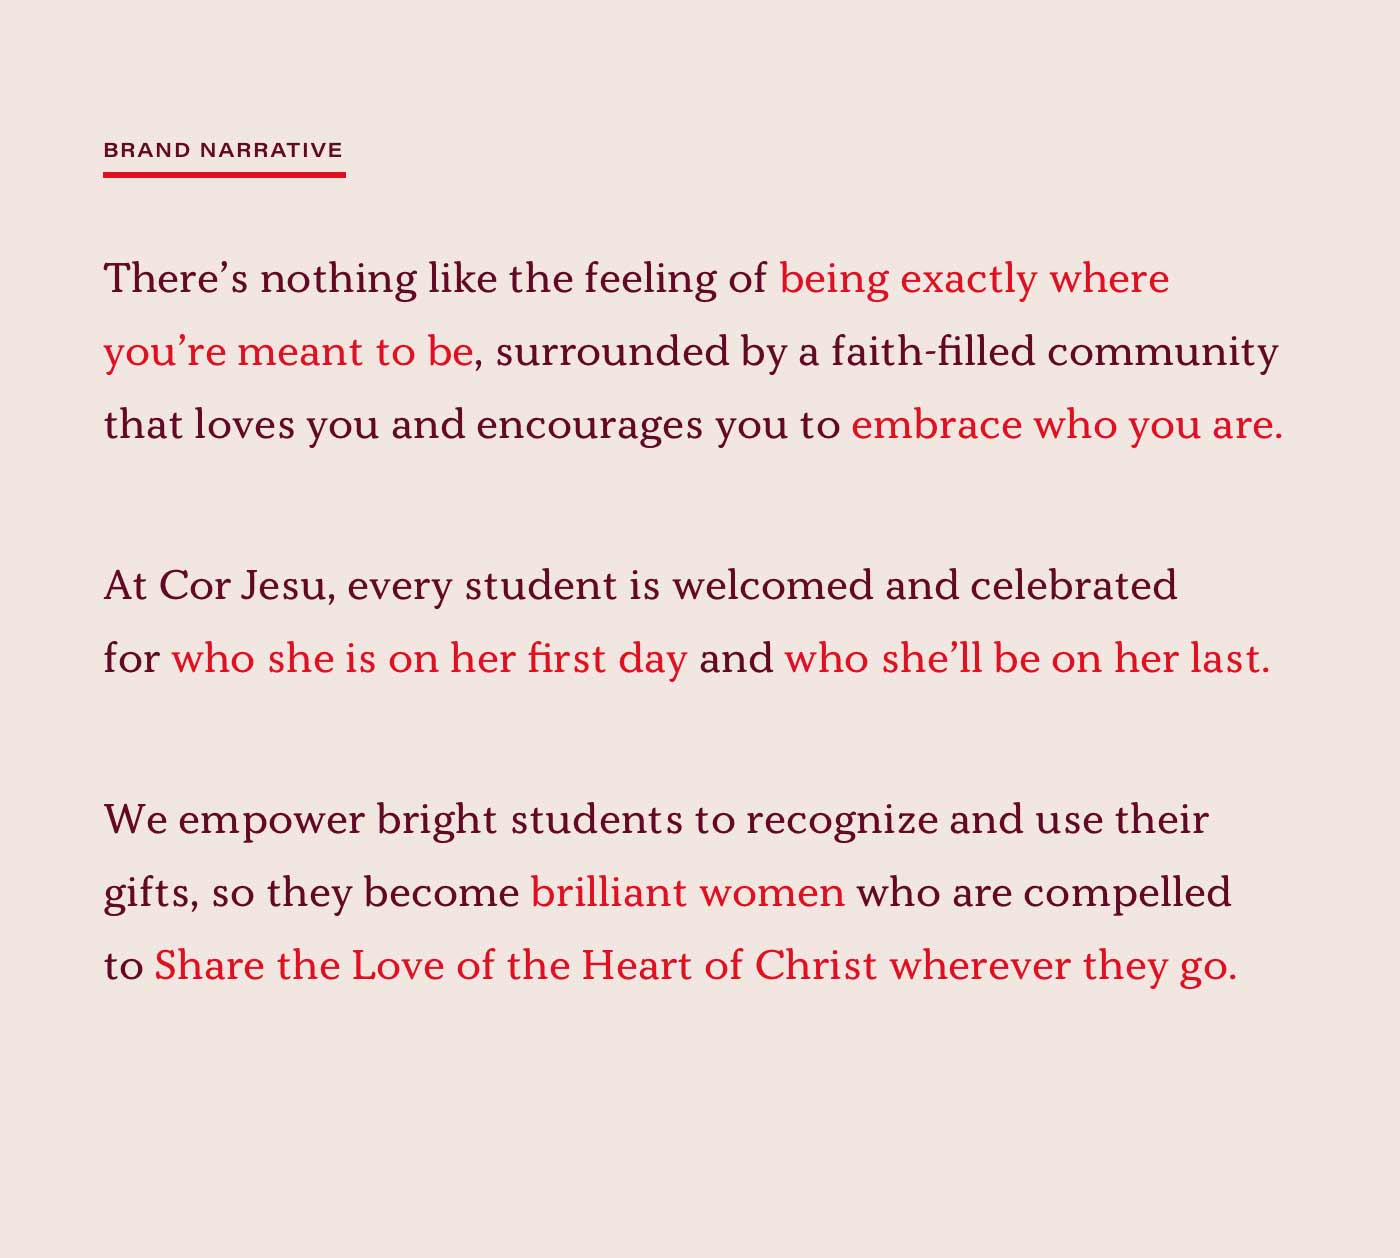 The new Cor Jesu brand narrative, which includes the words "At Cor Jesu, every student is welcomed and celebrated for who she is on her first day and who she'll be on her last."